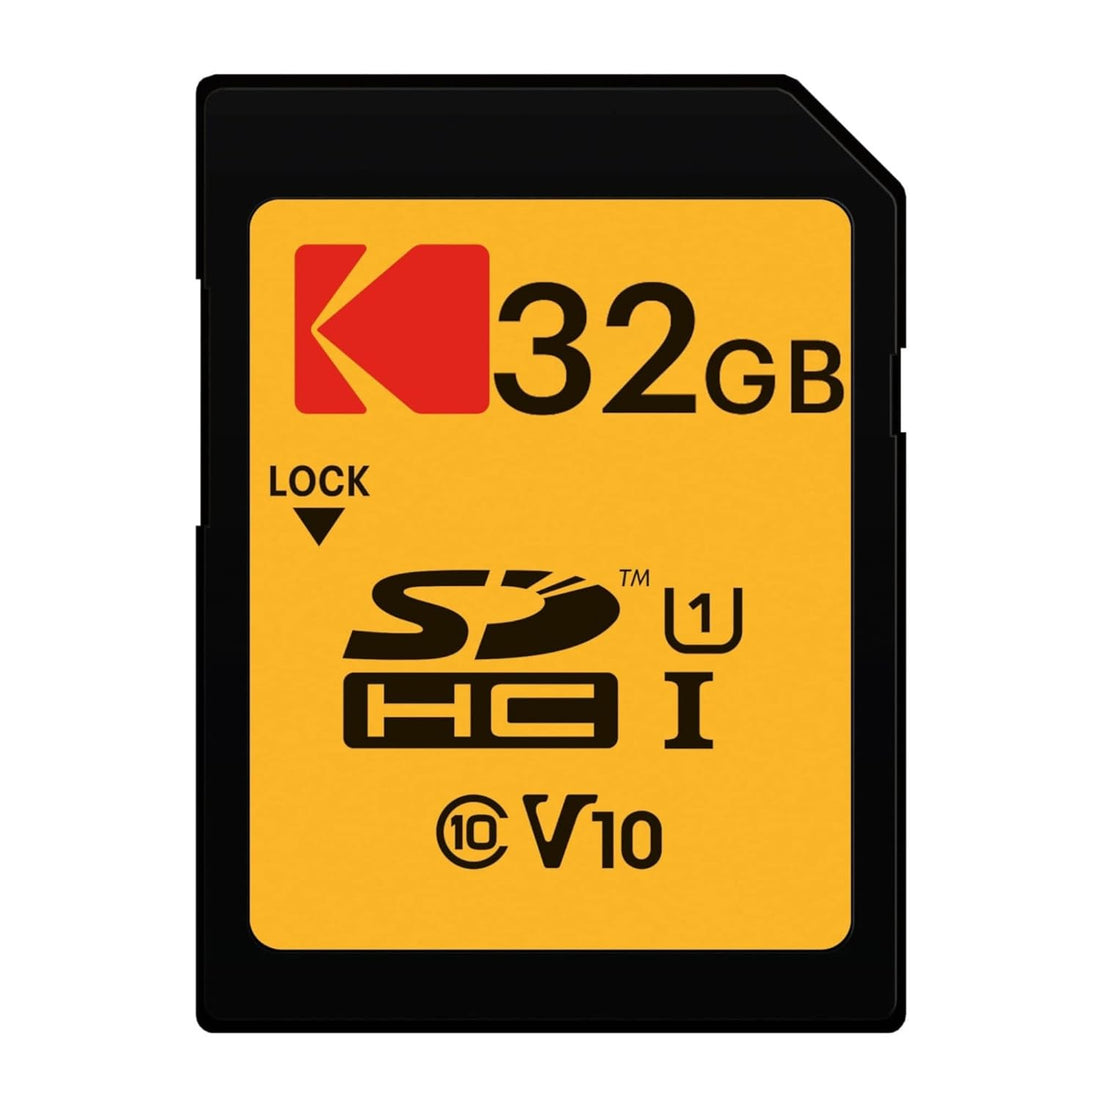 Kodak 32GB Class 10 UHS-I SDHC Memory Card (2-Pack) Bundle with Focus USB Card Reader (3 Items)